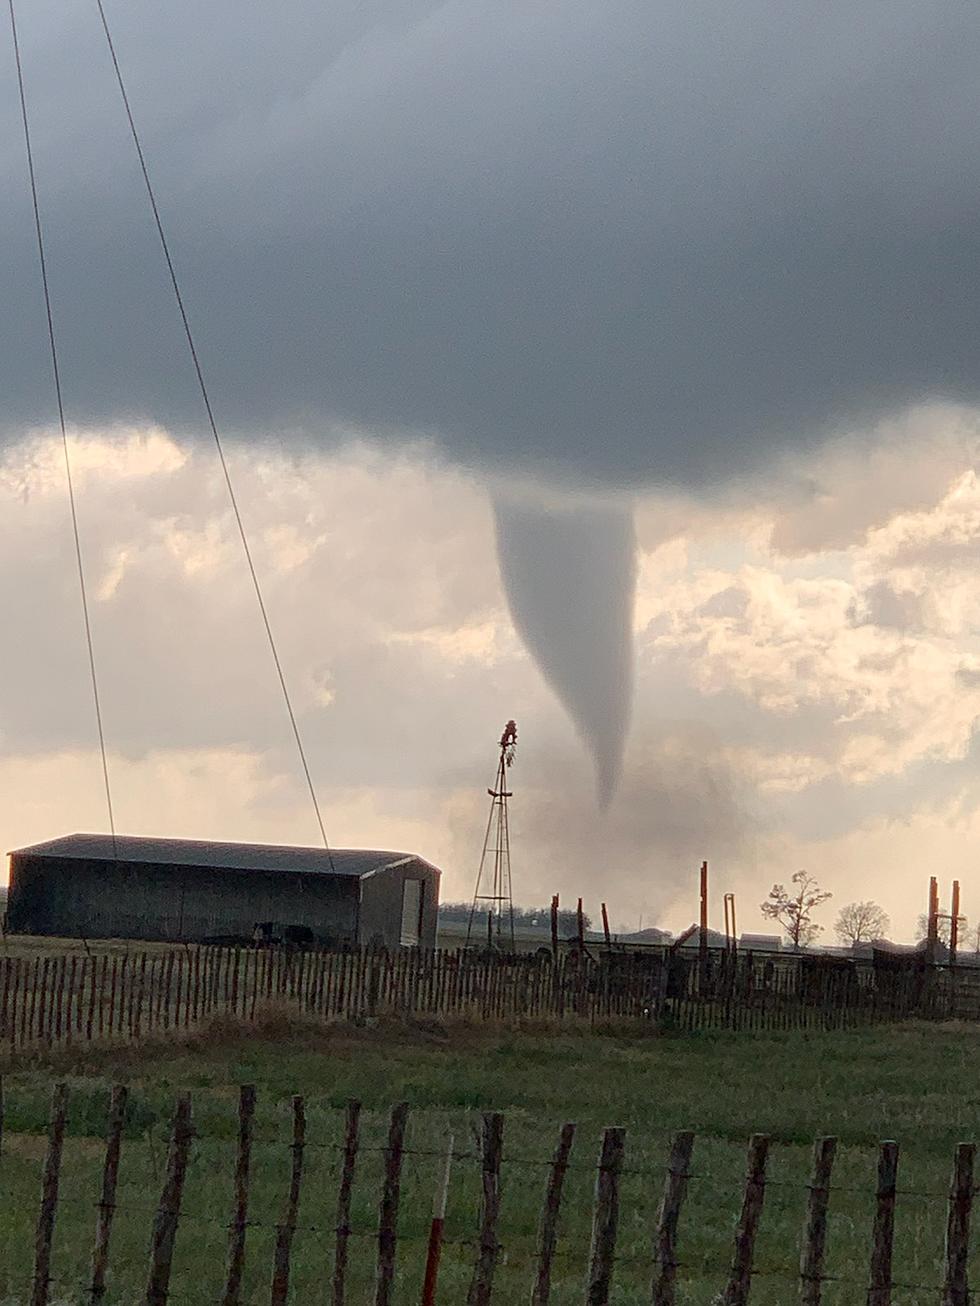 See Some Incredible Photos from Last Friday's Tornado Near Vernon